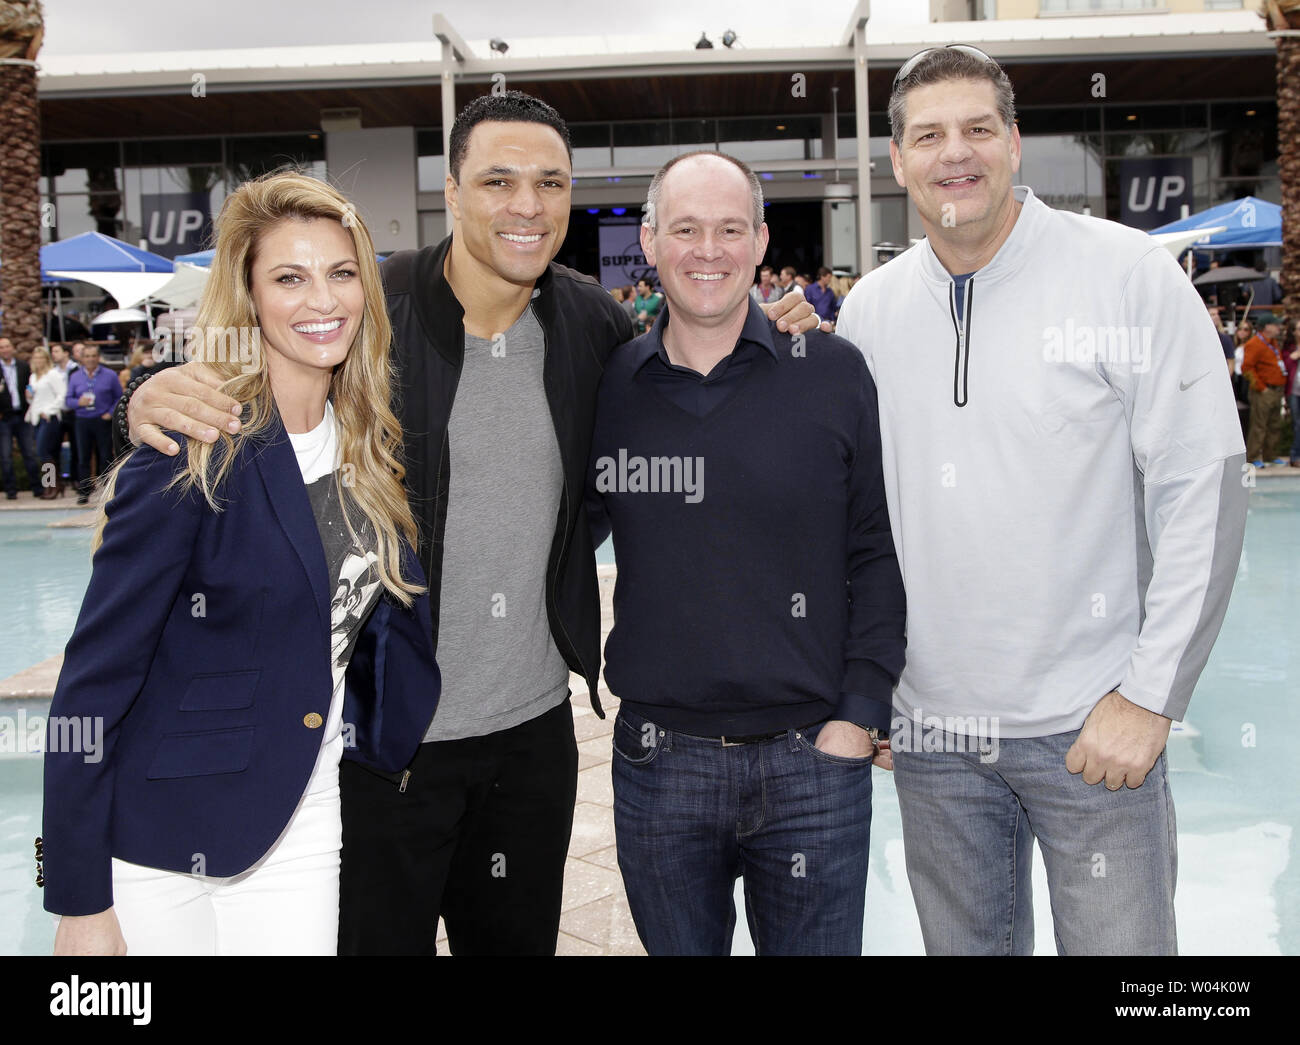 Wheels Up Members Erin Andrews, Tony Gonzalez, Rich Eisen and Mike Golic attend the Wheels Up Super Saturday Tailgate Party, one of the events leading up to Super Bowl XLIX, at MAYA Day + Nightclub in Scottsdale, AZ on January 31, 2015. Super Bowl XLIV will feature the Seattle Seahawks and the New England Patriots on February 1st at University of Phoenix Stadium in Glendale, Arizona.        Photo by John Angelillo/UPI Stock Photo